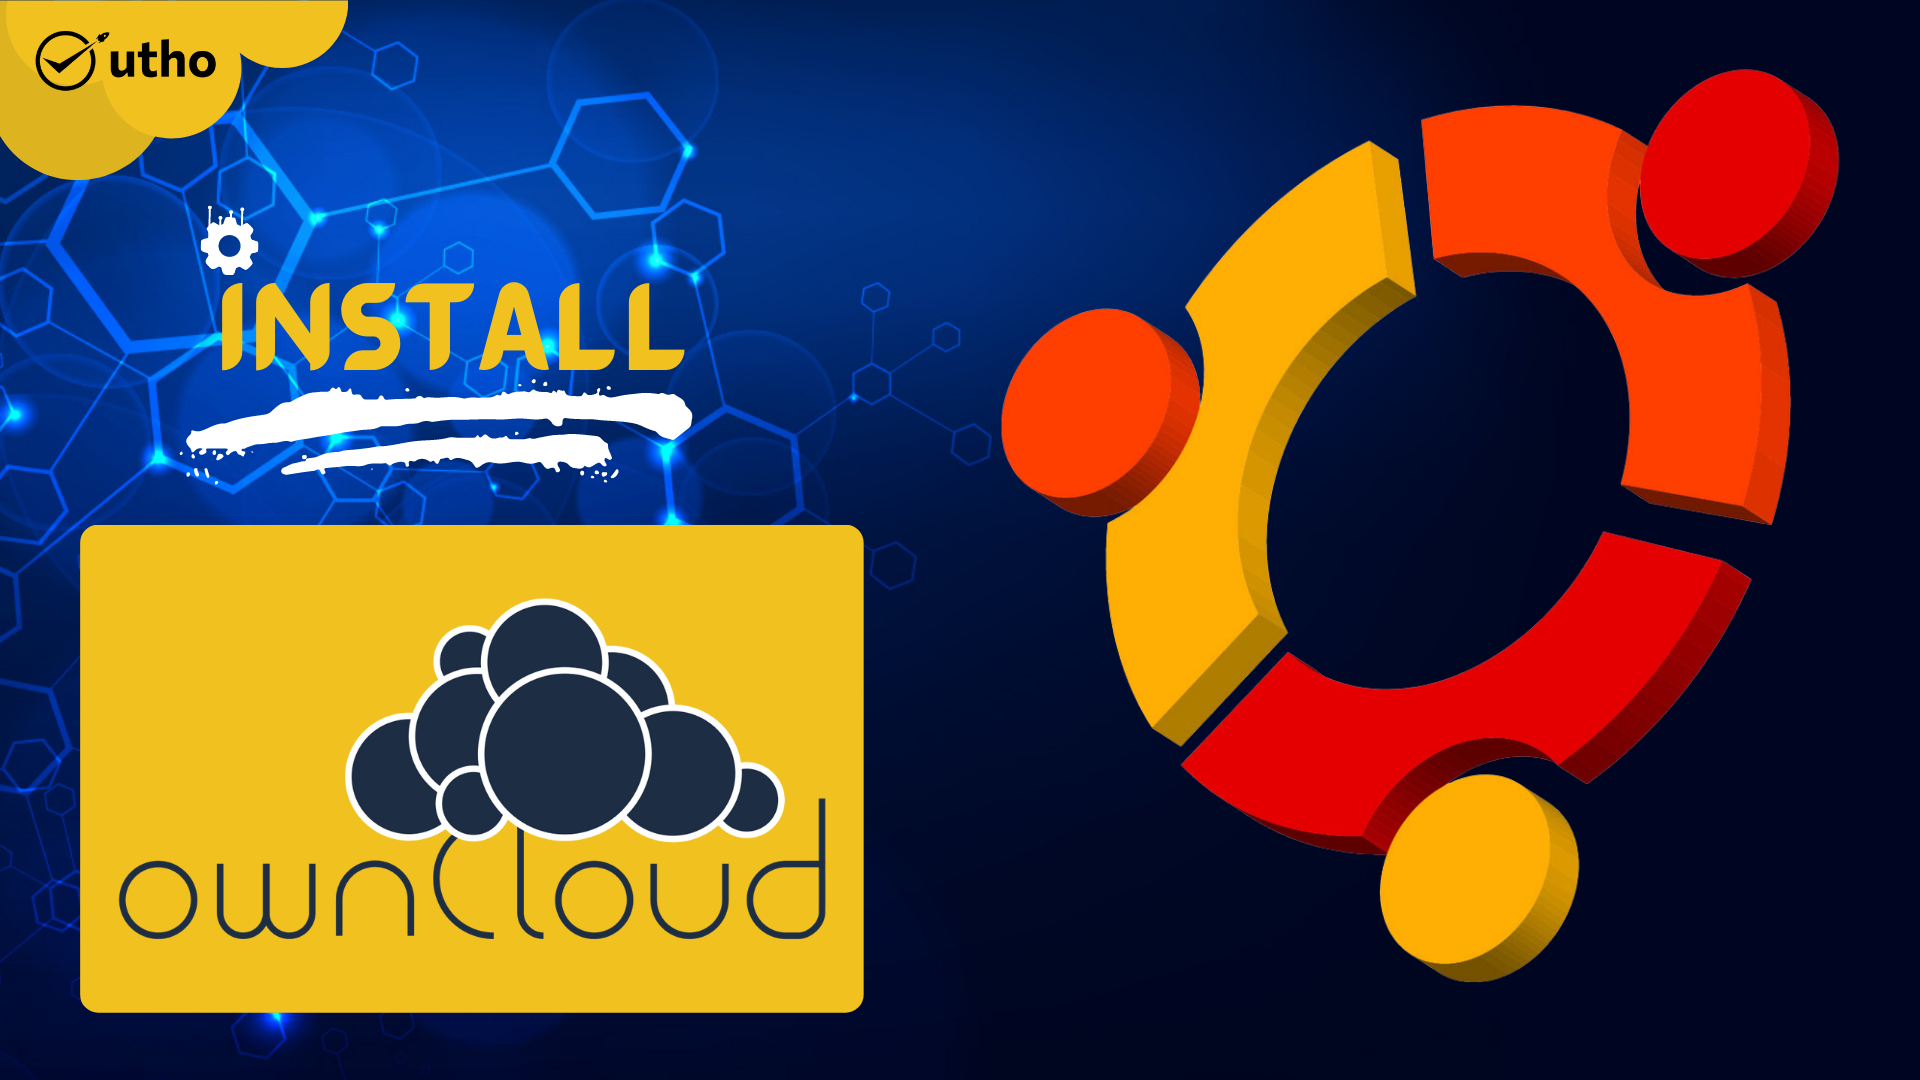 How to install OwnCloud on Ubuntu server